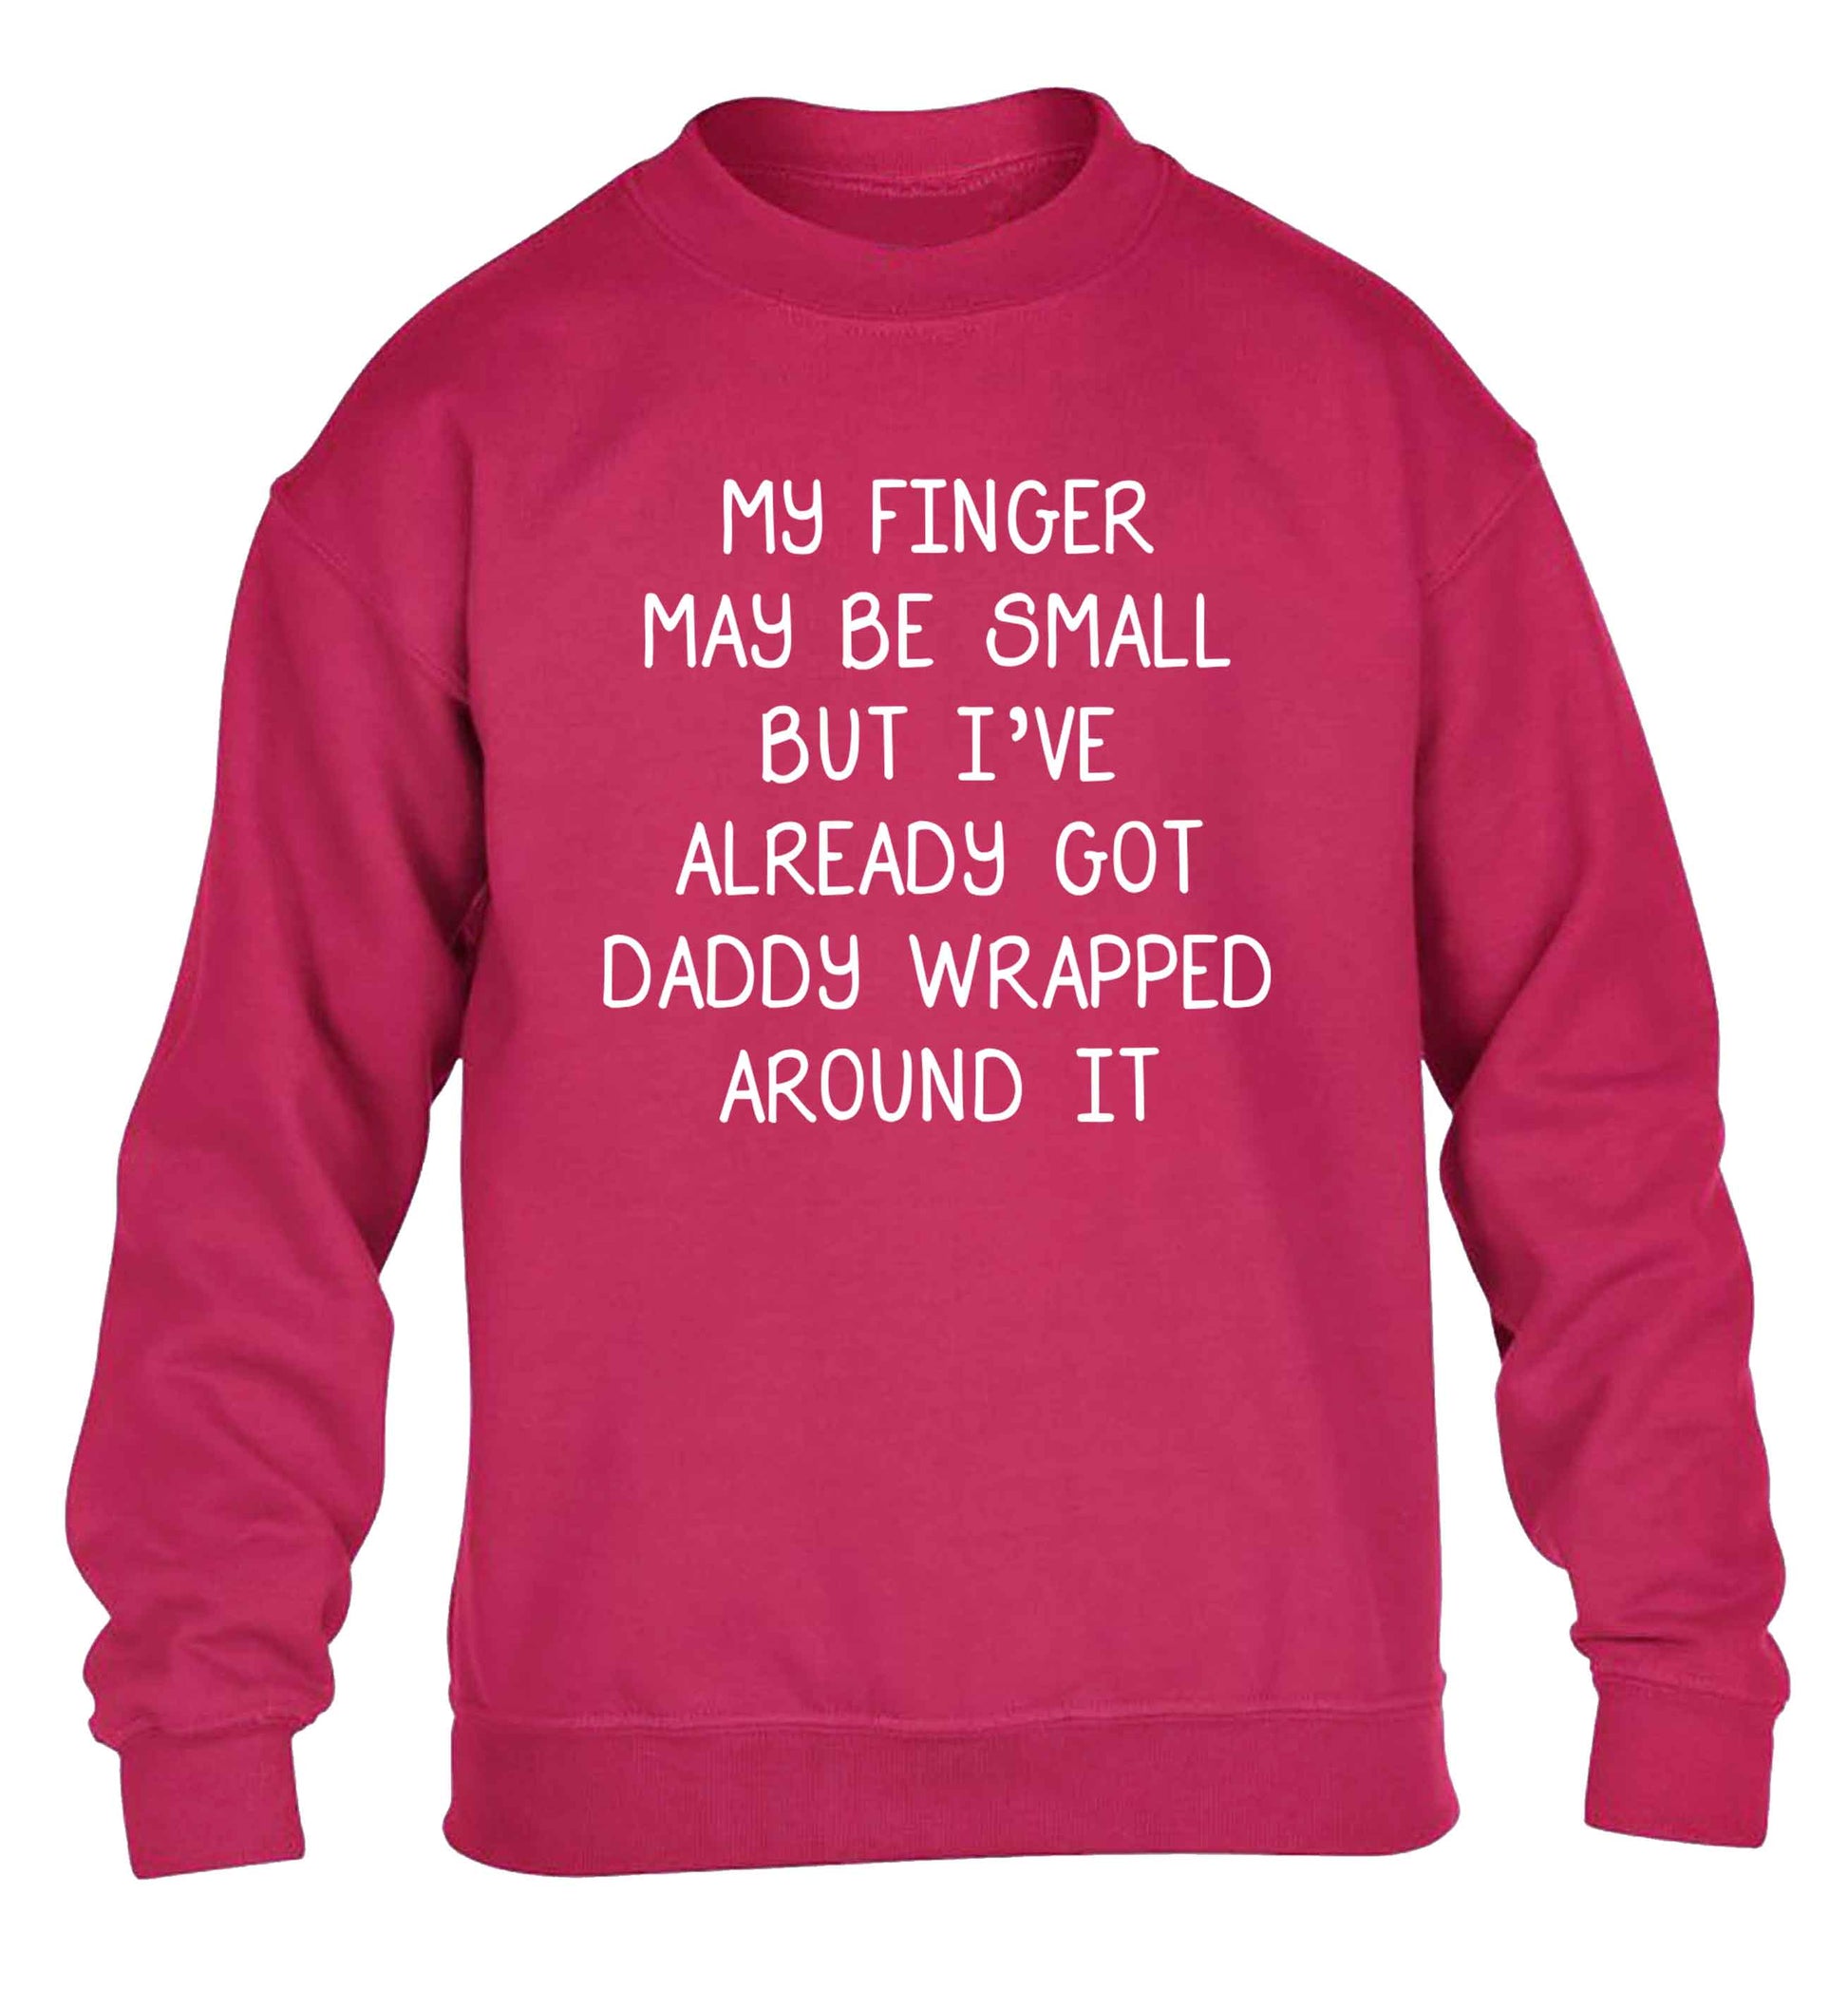 My finger may be small but I've already got daddy wrapped around it children's pink sweater 12-13 Years